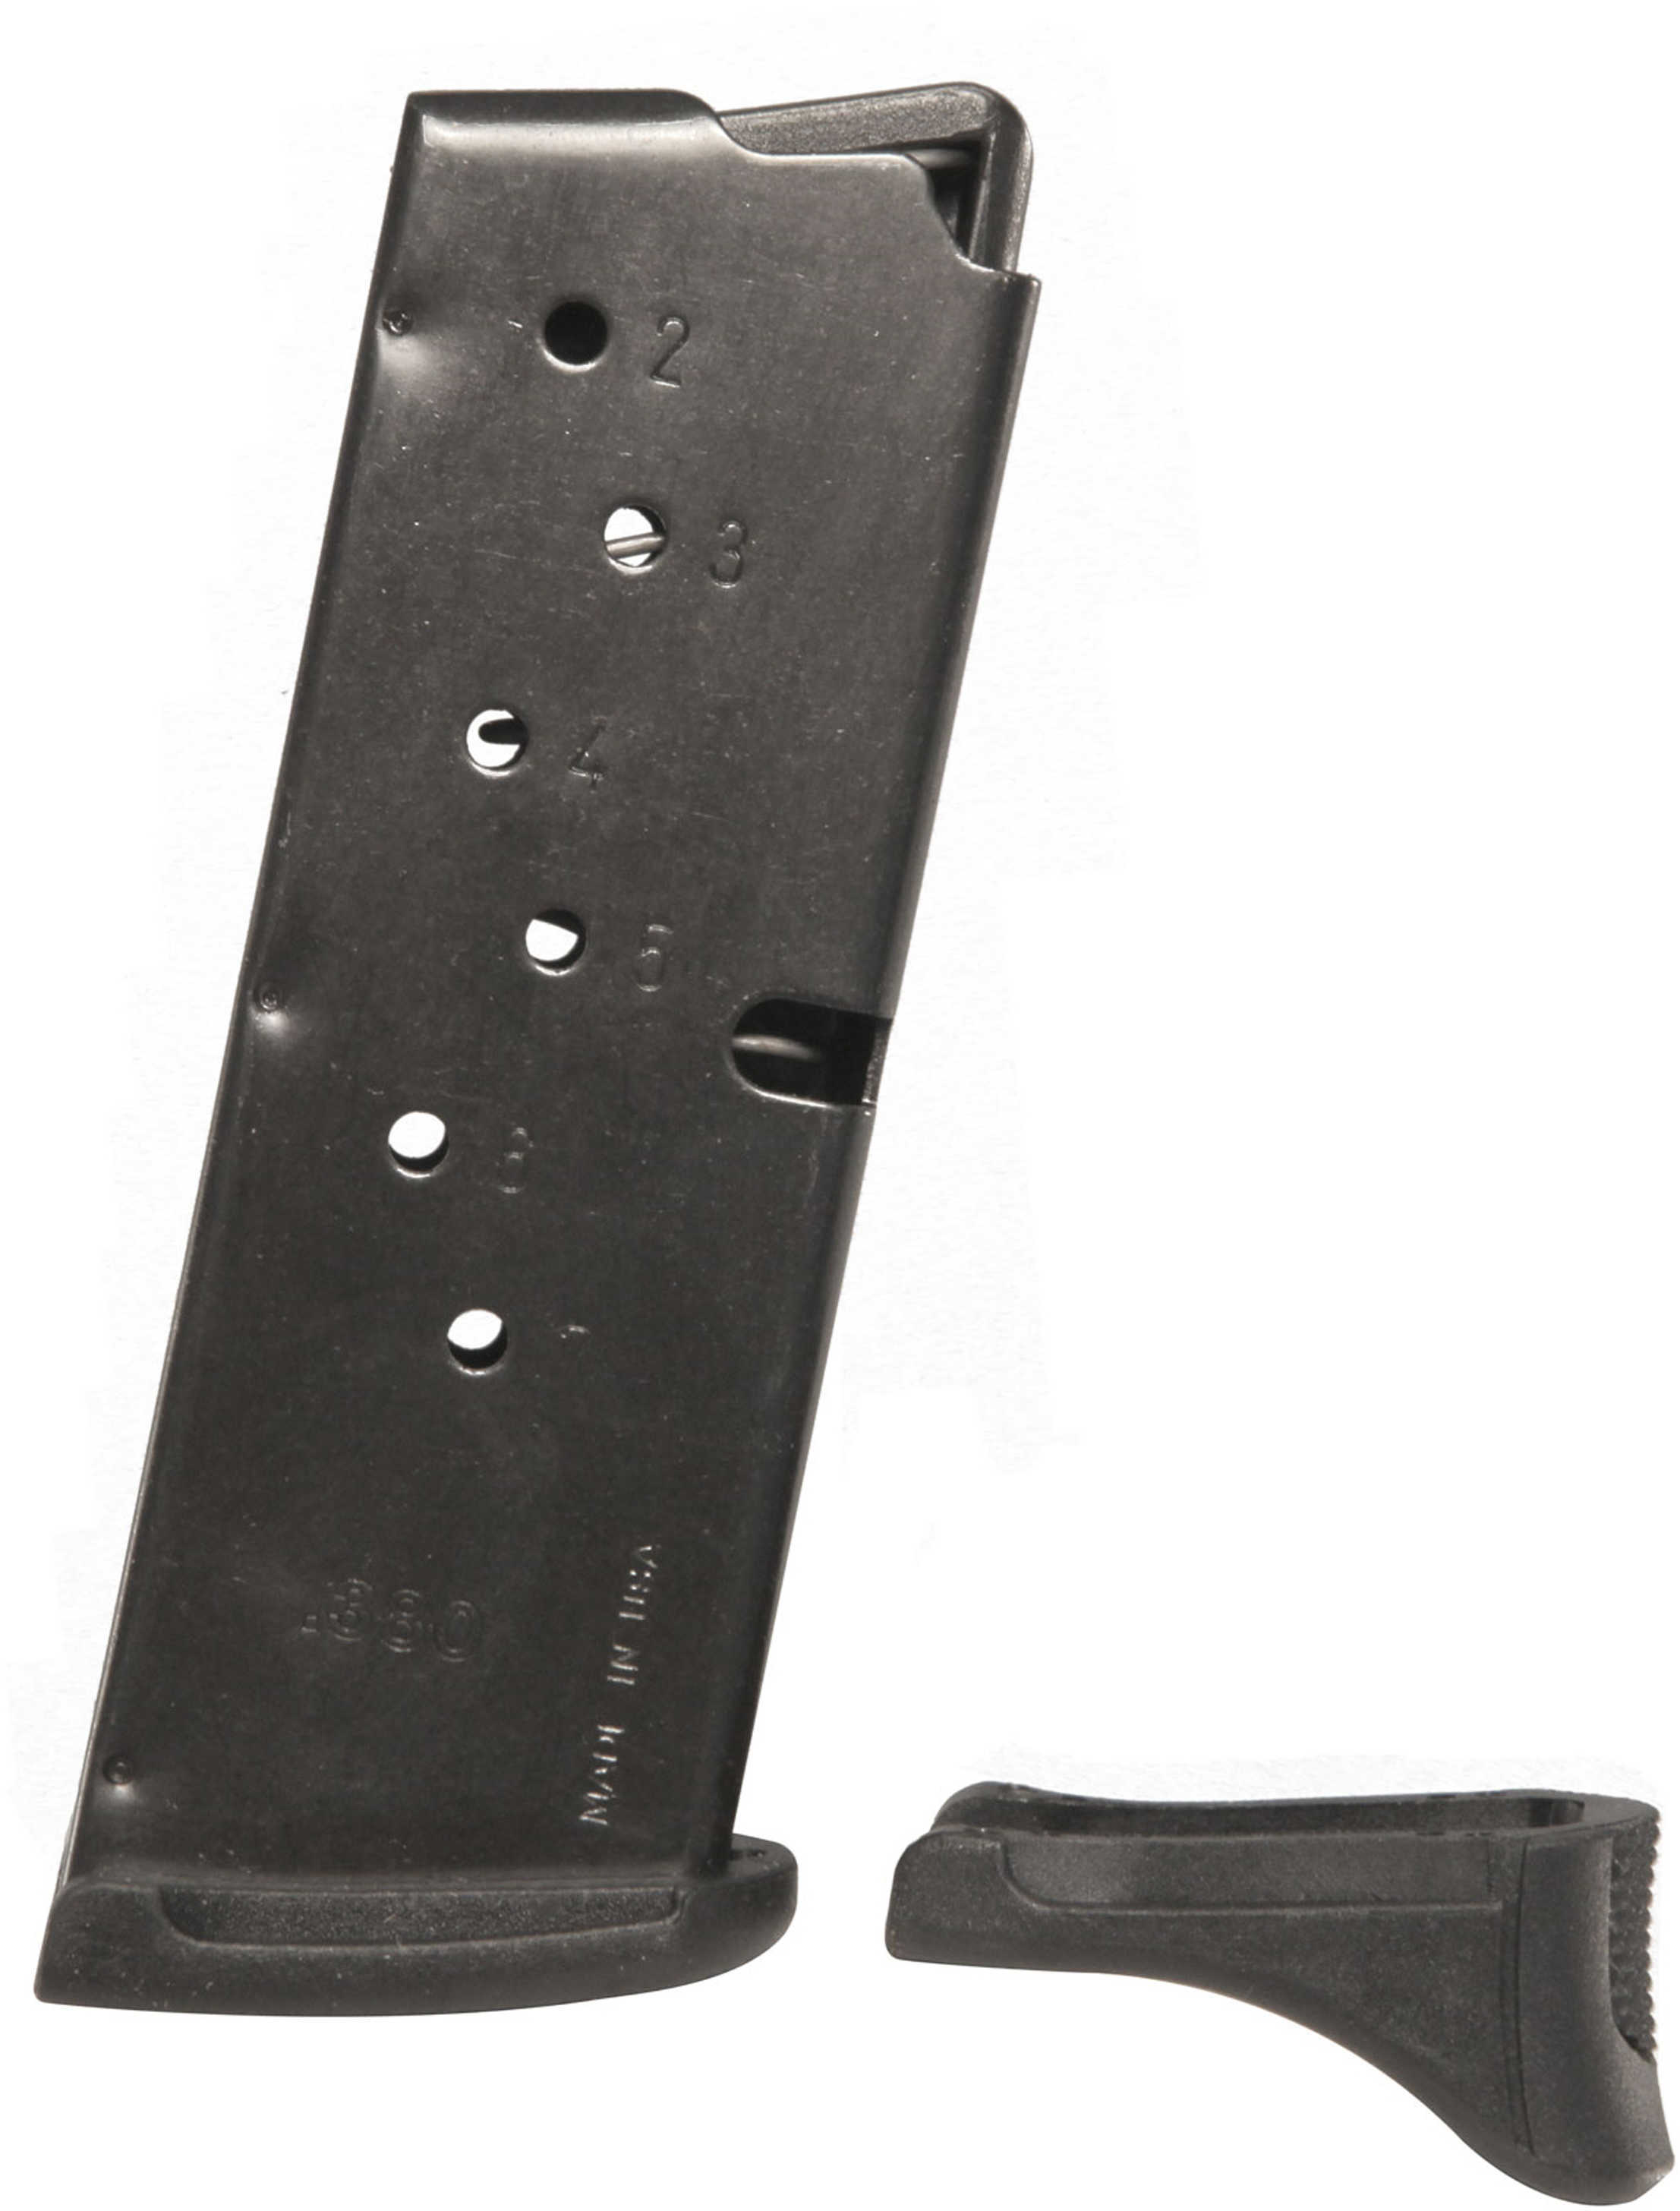 Ruger® Magazine 380 ACP 7Rd Black Comes with Finger Rest Extension Fits LC380 90416